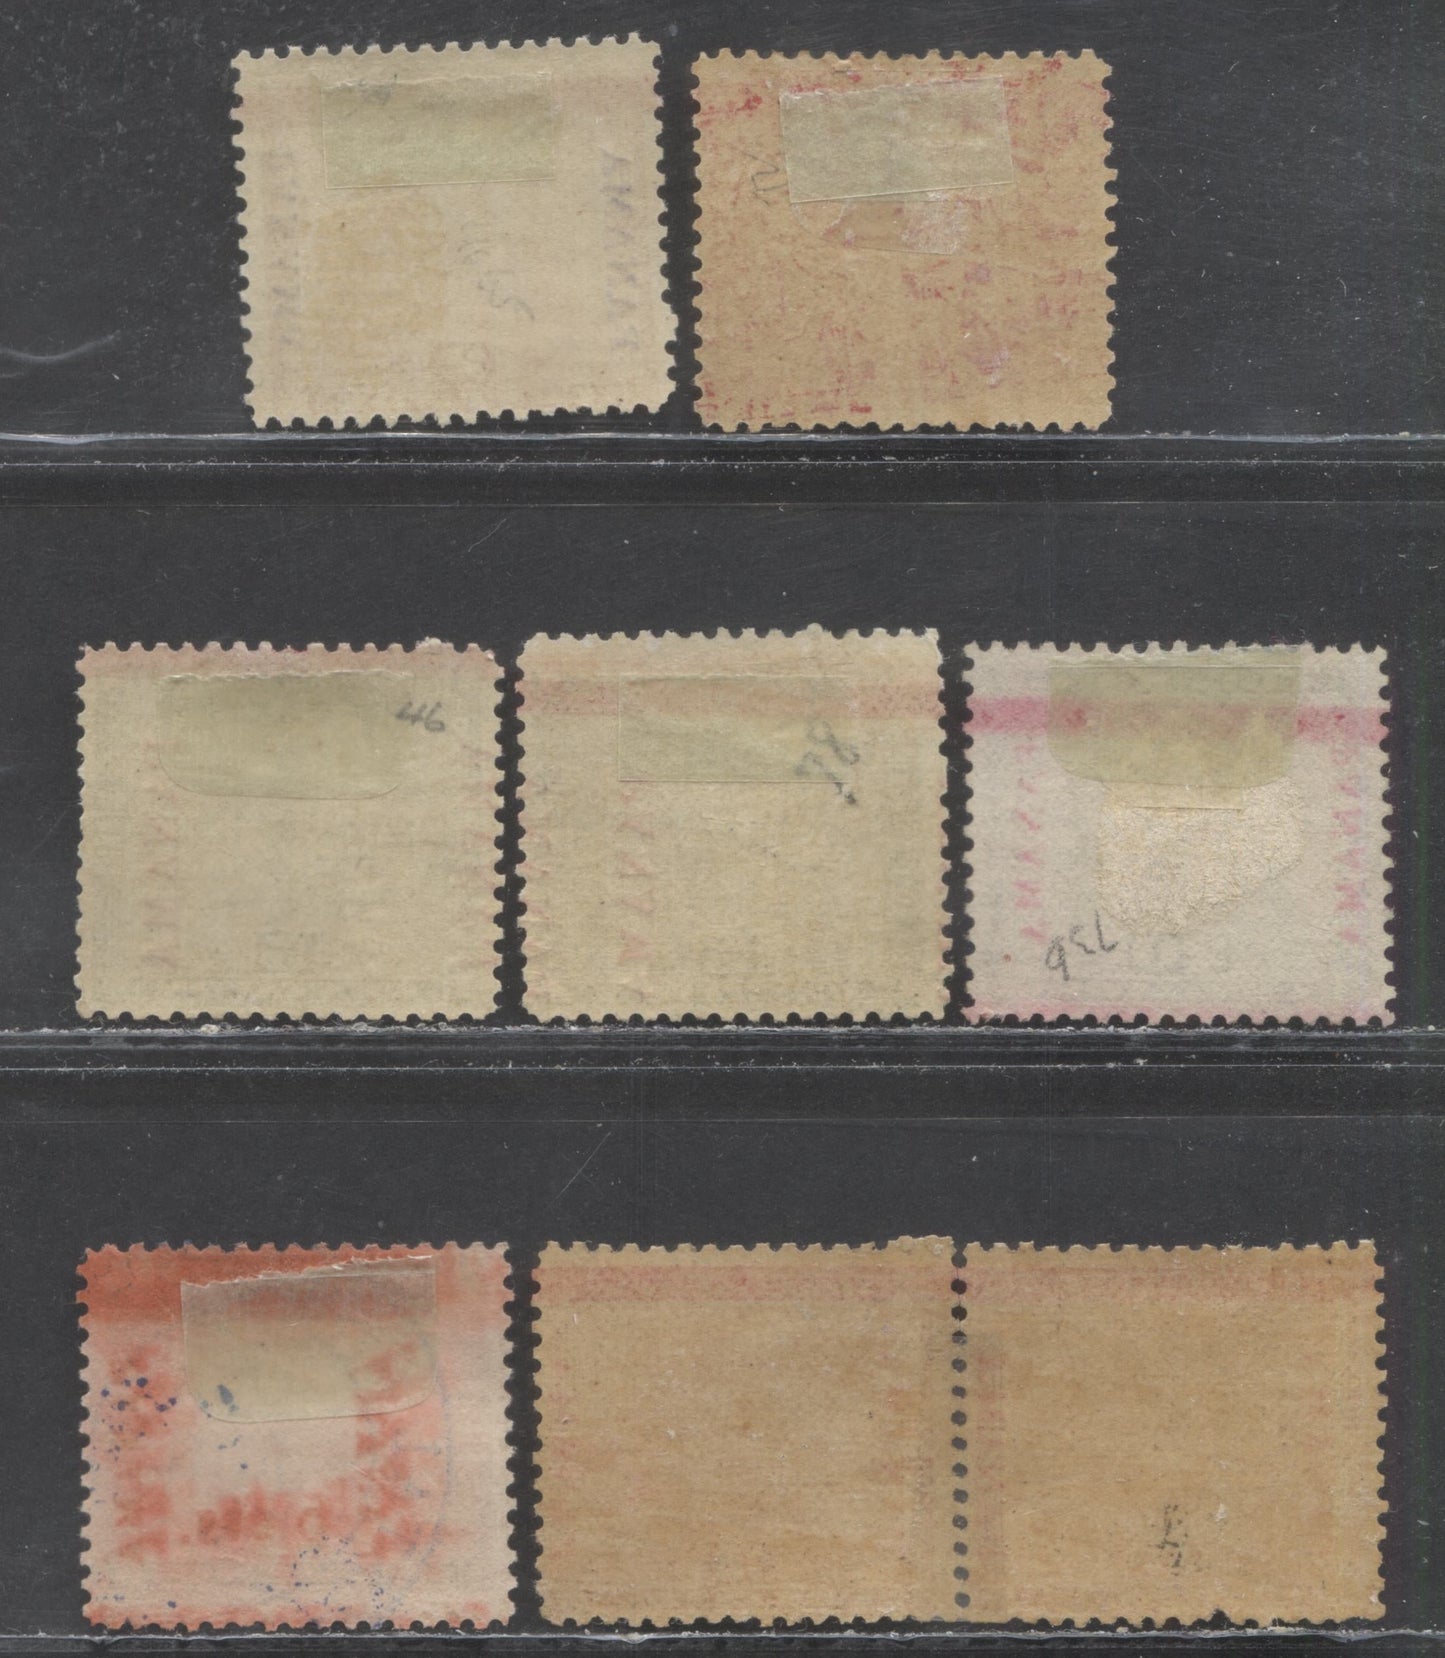 Lot 100 Panama SC#65/82 1903 Overprints & Varieties, 7 F/VFOG, Used & Unused Singles, Click on Listing to See ALL Pictures, 2022 Scott Classic Cat. $29.3 USD